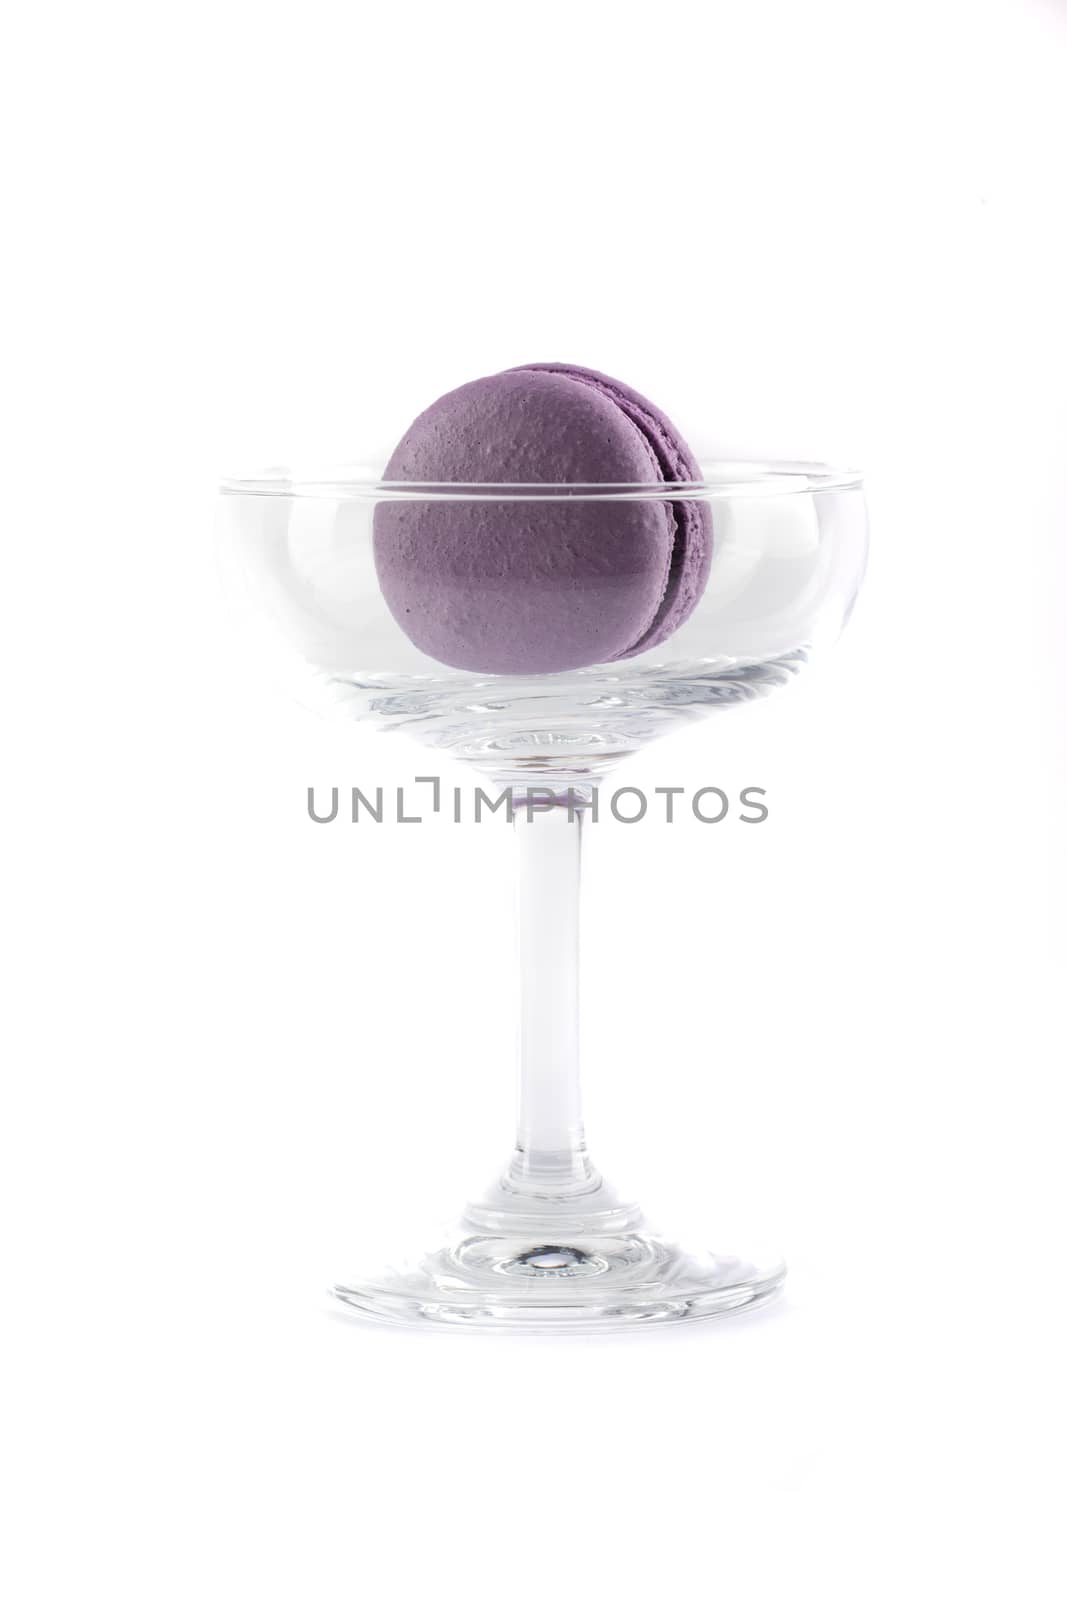 a purple macaroon with chocolate cream filling in a clear glass, isolated on white background